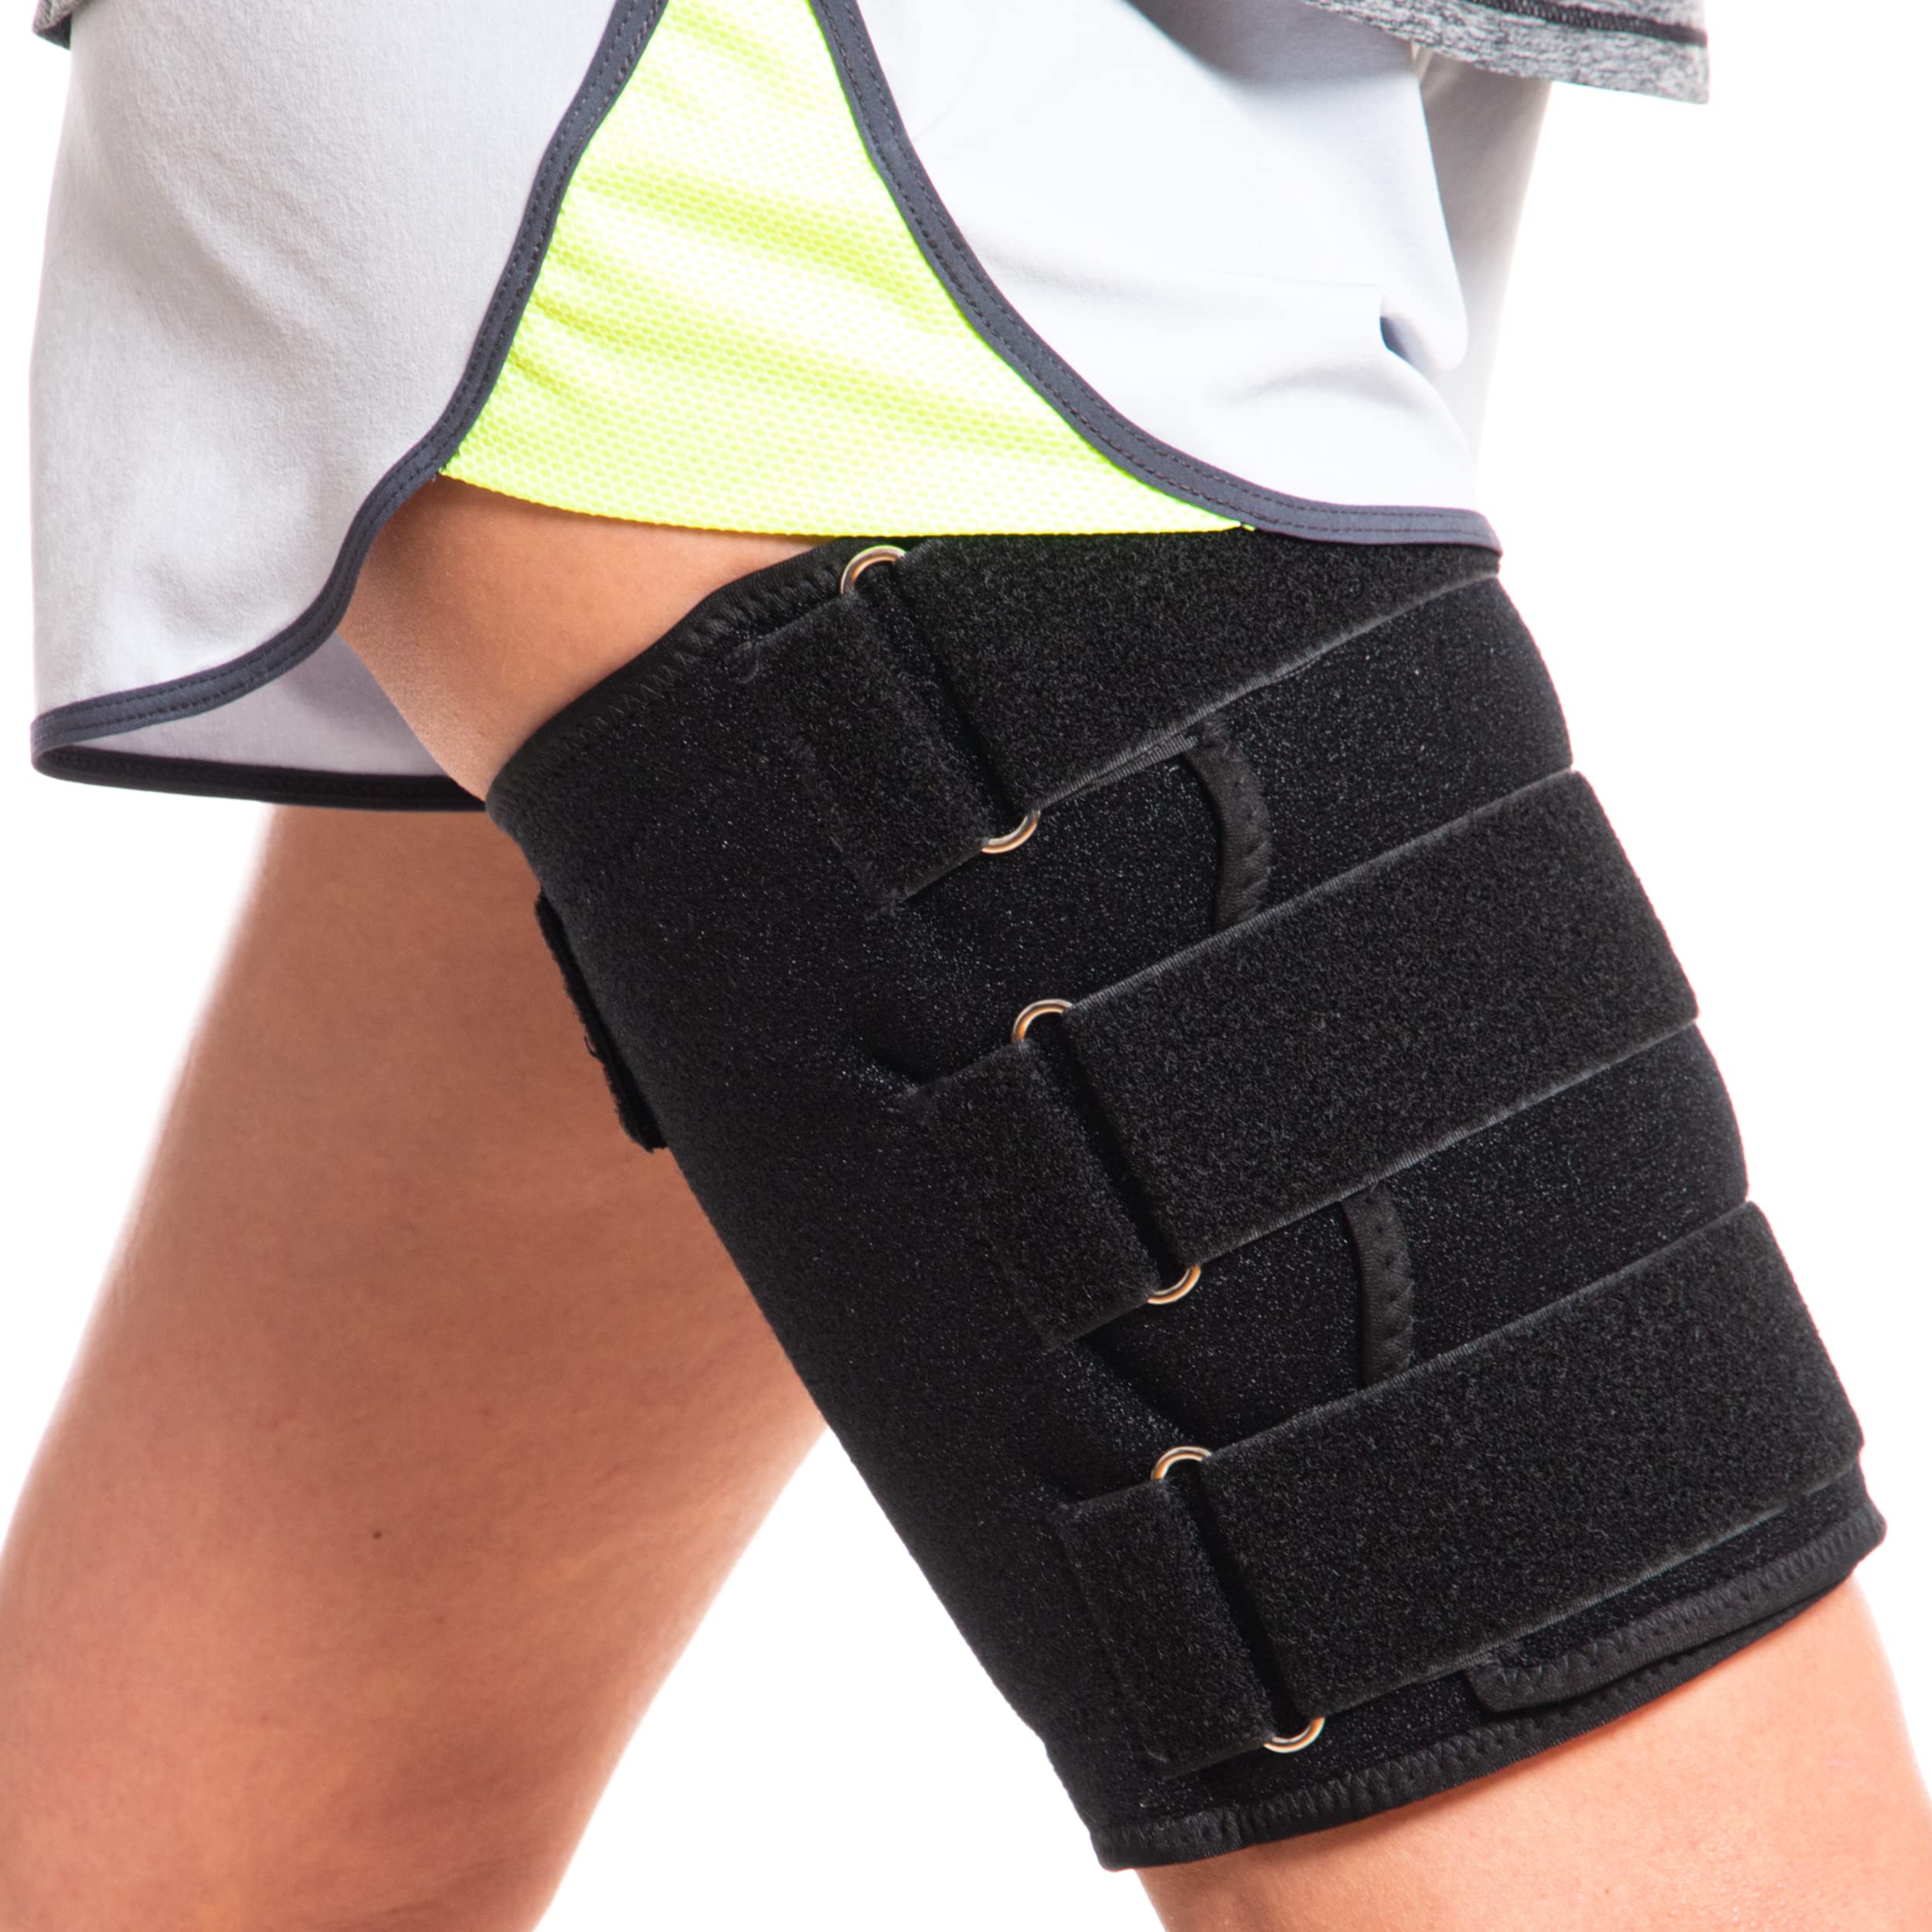 Thigh Compression Sleeve For Hamstring and Quad Support